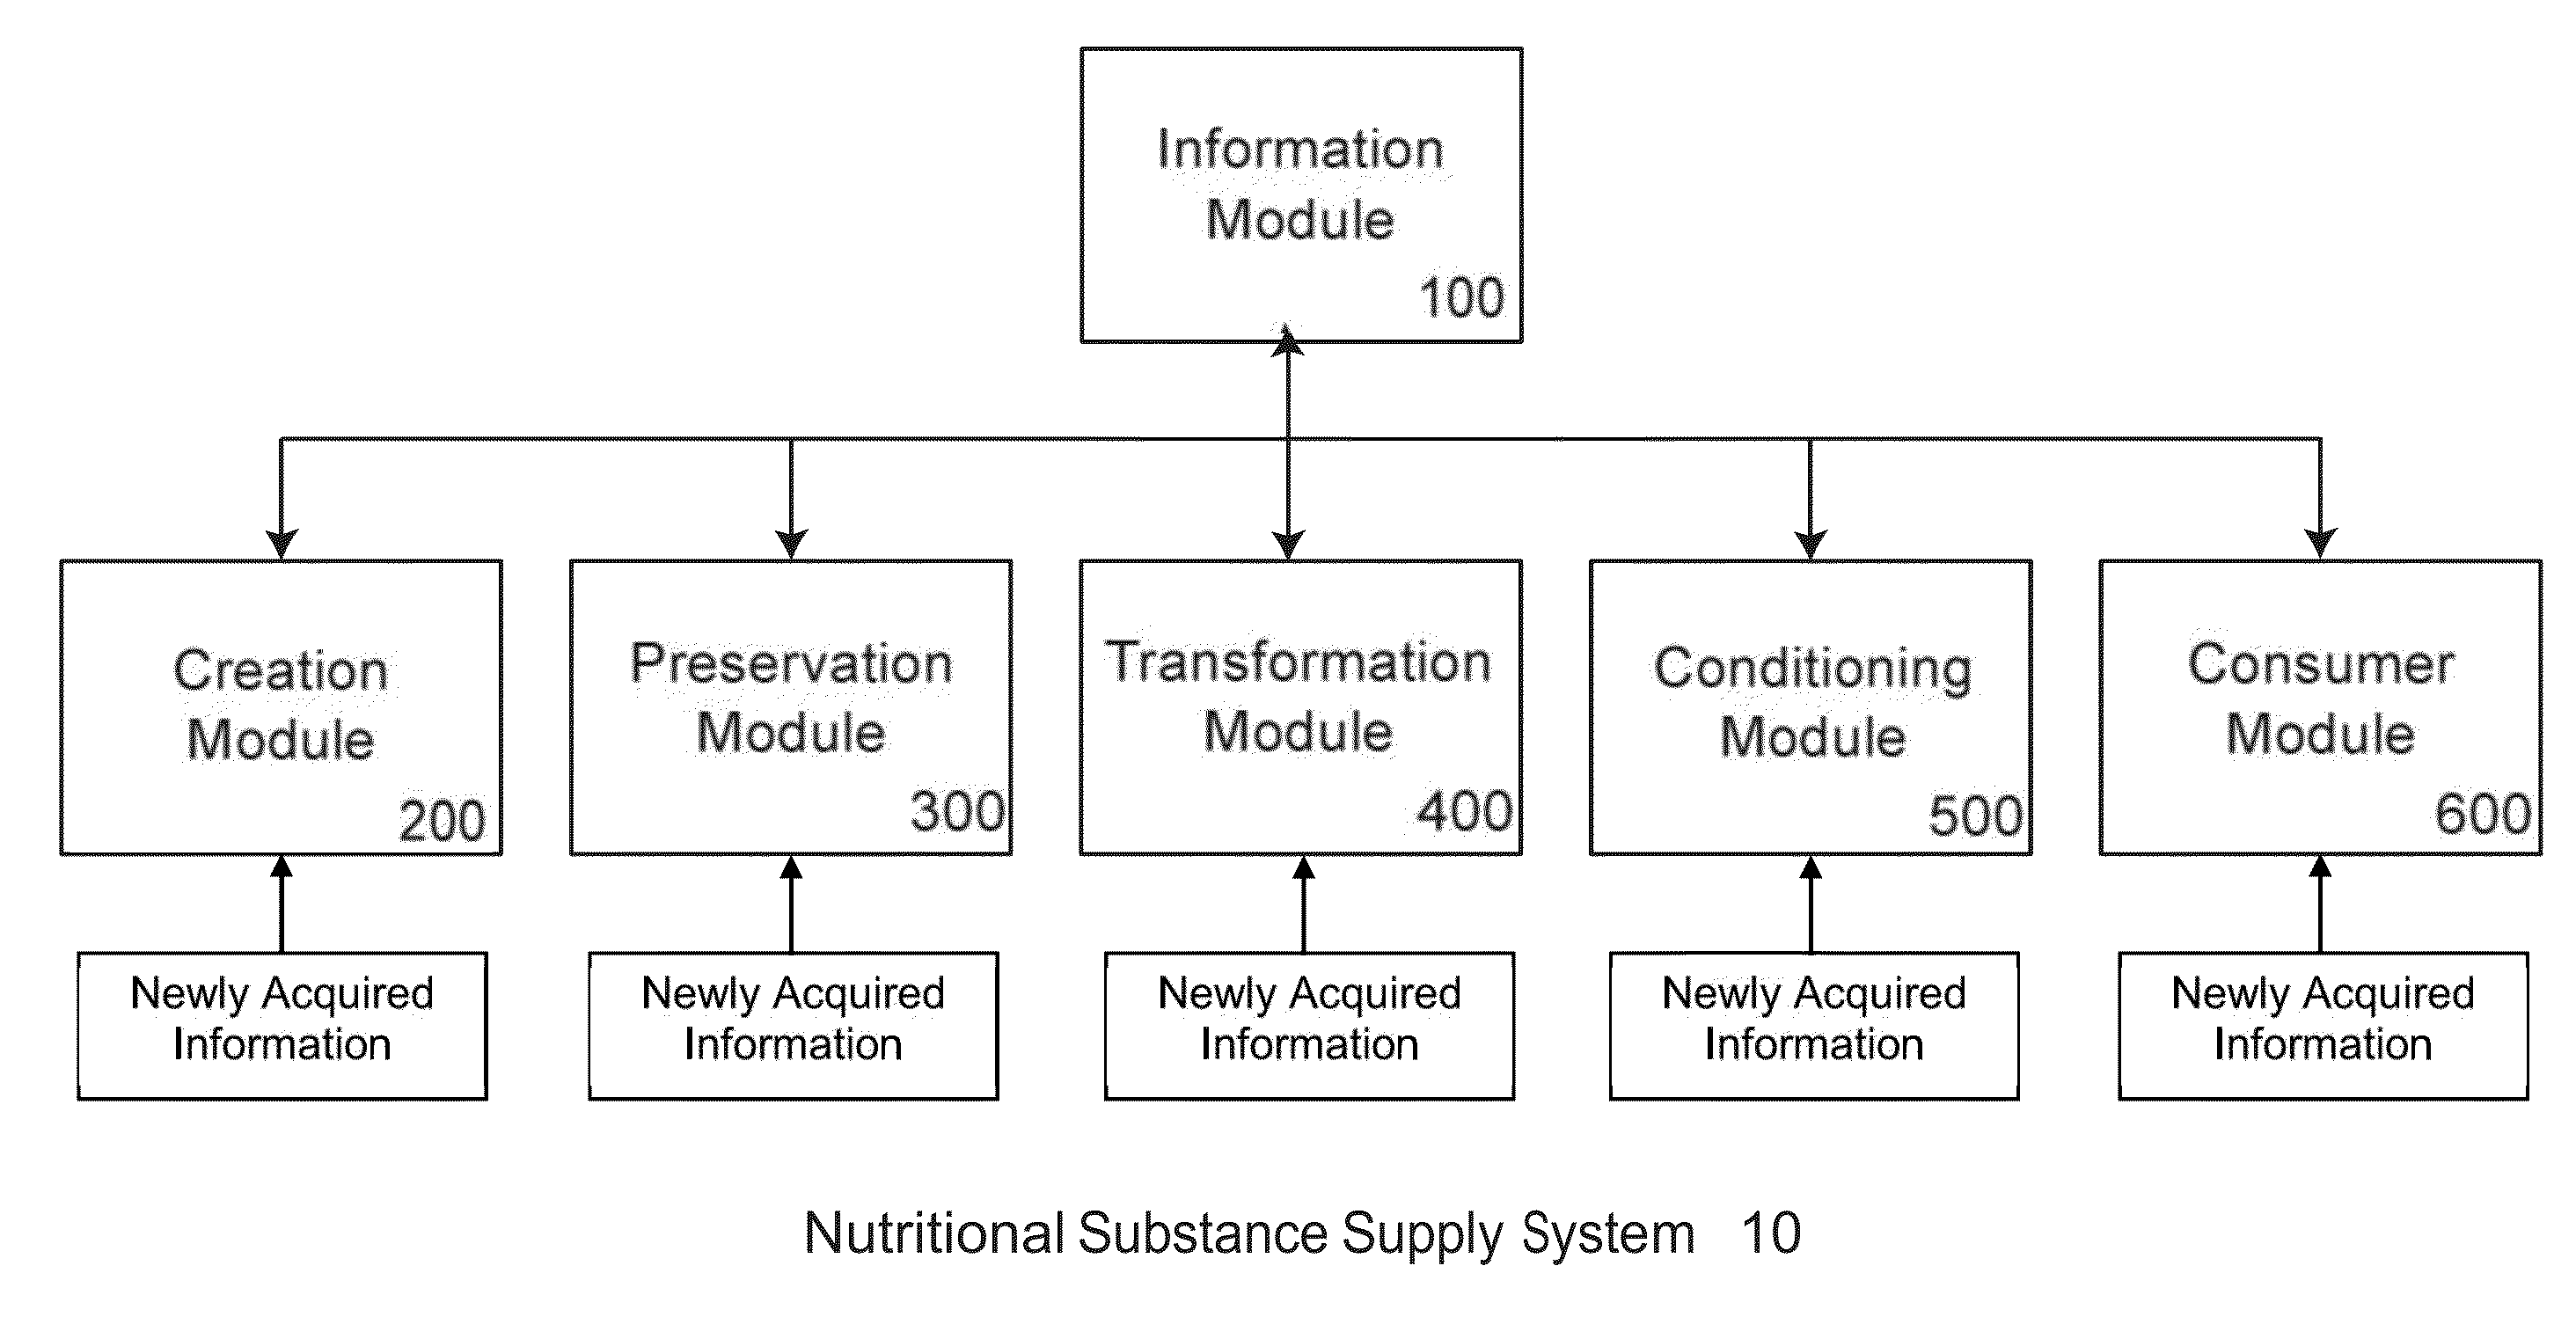 Conditioner with Weight Sensors for Nutritional Substances